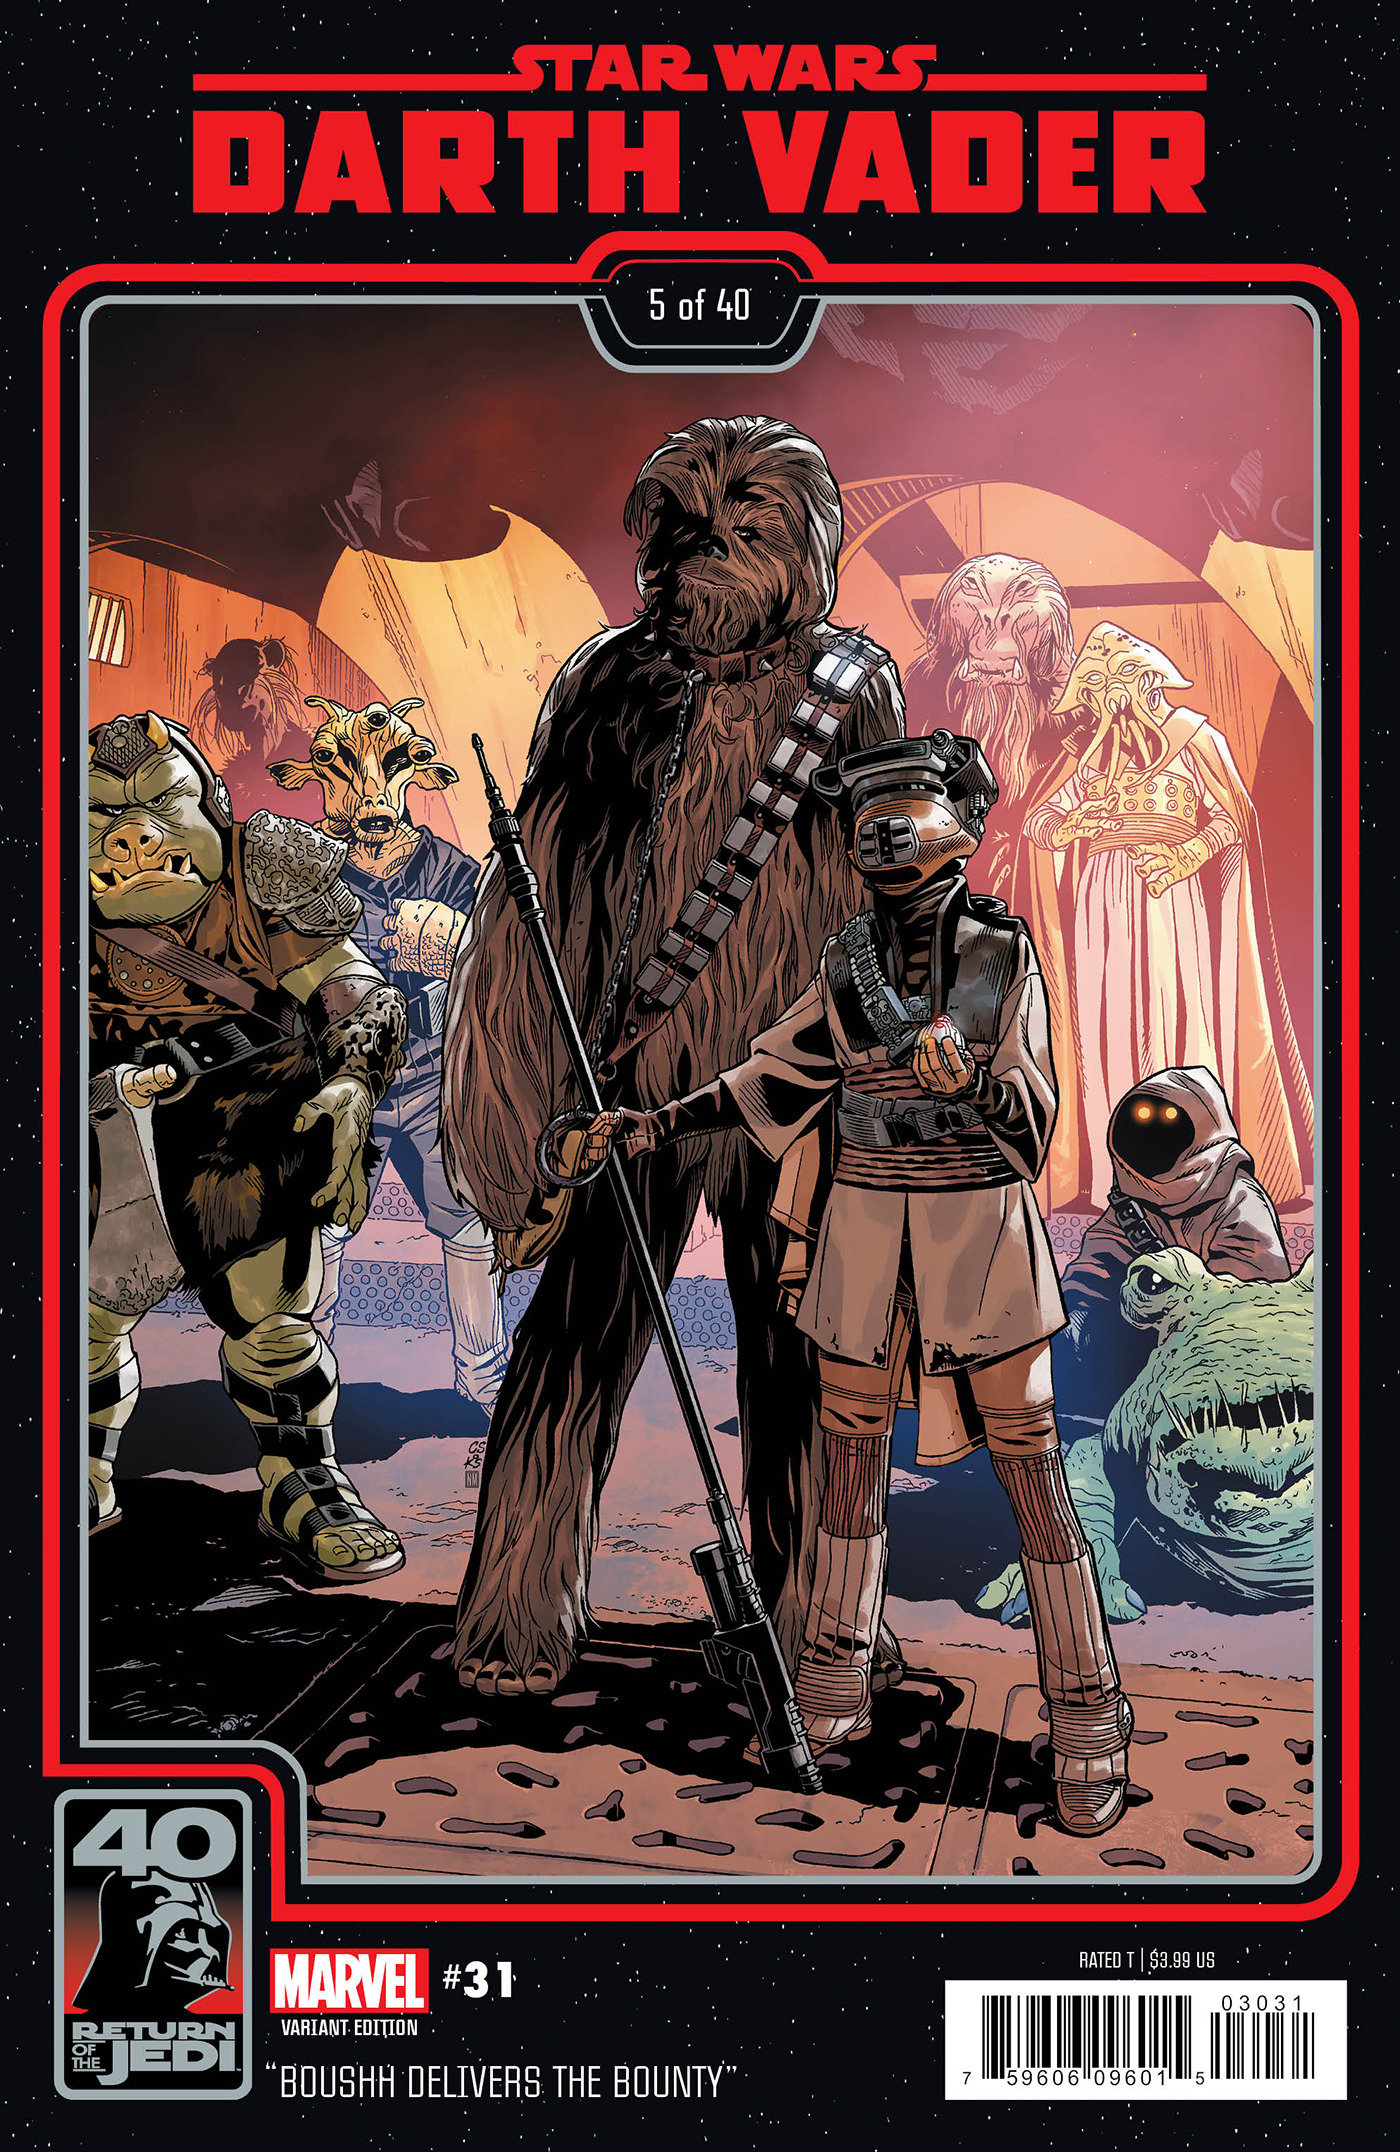 Darth Vader #31 (Chris Sprouse Return of the Jedi 40th Anniversary Variant Cover 5 of 40) (08.02.2023)